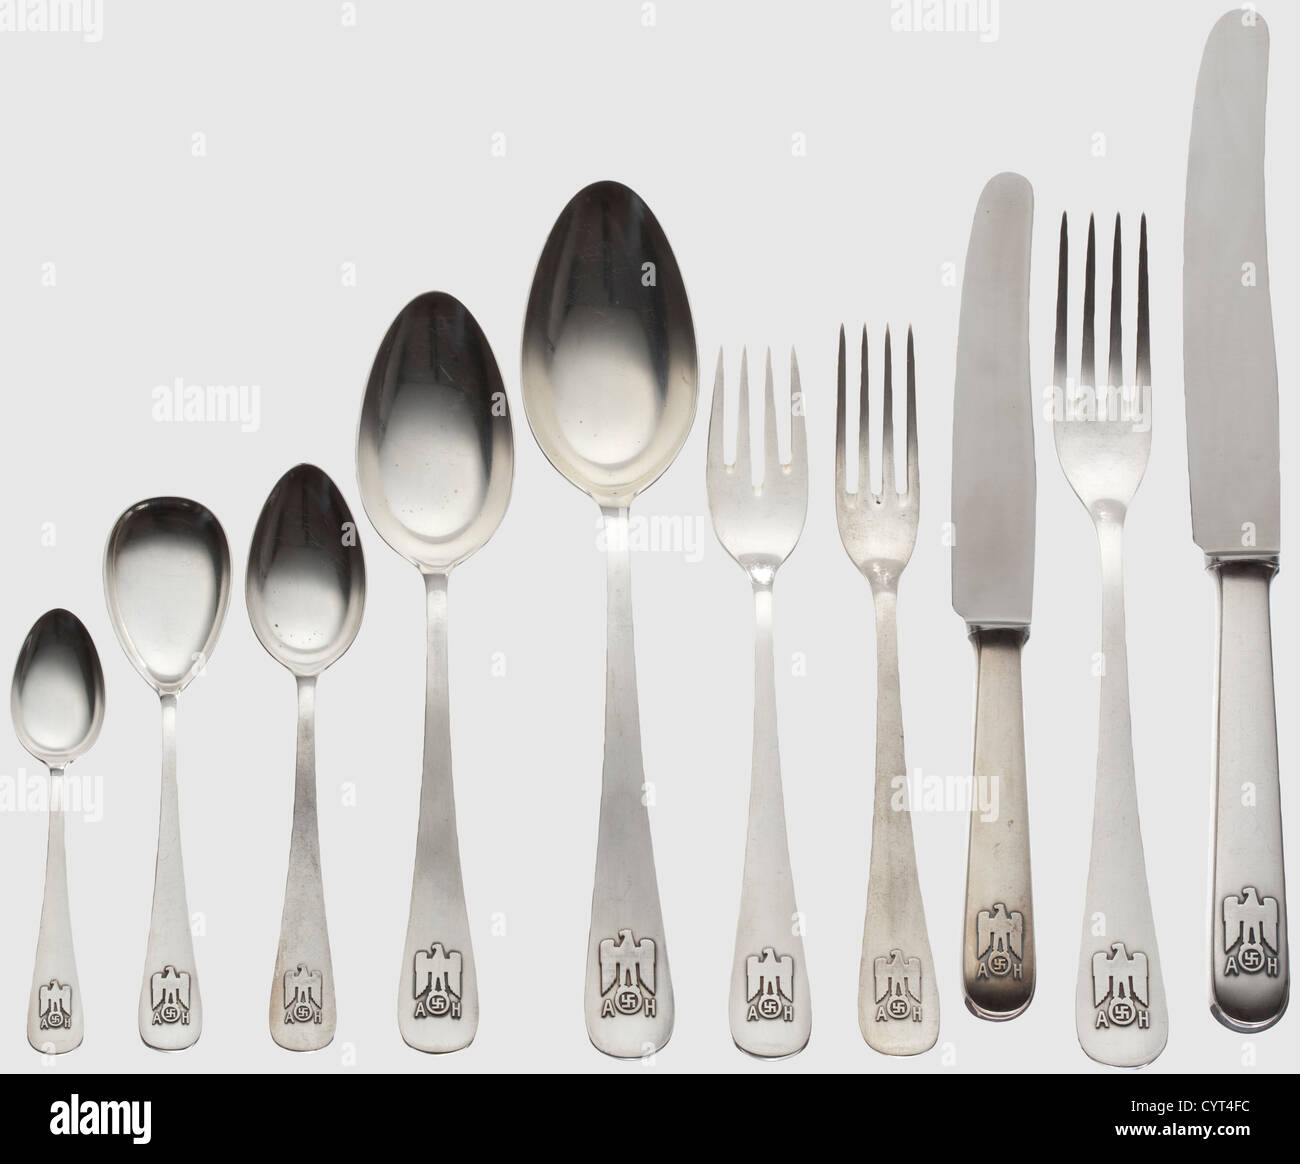 Adolf Hitler,twelve pieces from his personal silverware in the Berghof Consists of serving knives with a steel blade,serving forks and spoons. Knife with a steel blade,three forks and a spoon. Fish fork. Desser,sugar,and mocha spoons.The smooth grips with the national eagle in relief surmounting the monogram 'AH',and the hallmark '800' with crescent moon and crown. Lengths between 11 and 25.5 cm,total weight 561 g,historic,historical,1930s,1930s,20th century,NS,National Socialism,Nazism,Third Reich,German Reich,Germany,German,National Social,Additional-Rights-Clearences-Not Available Stock Photo